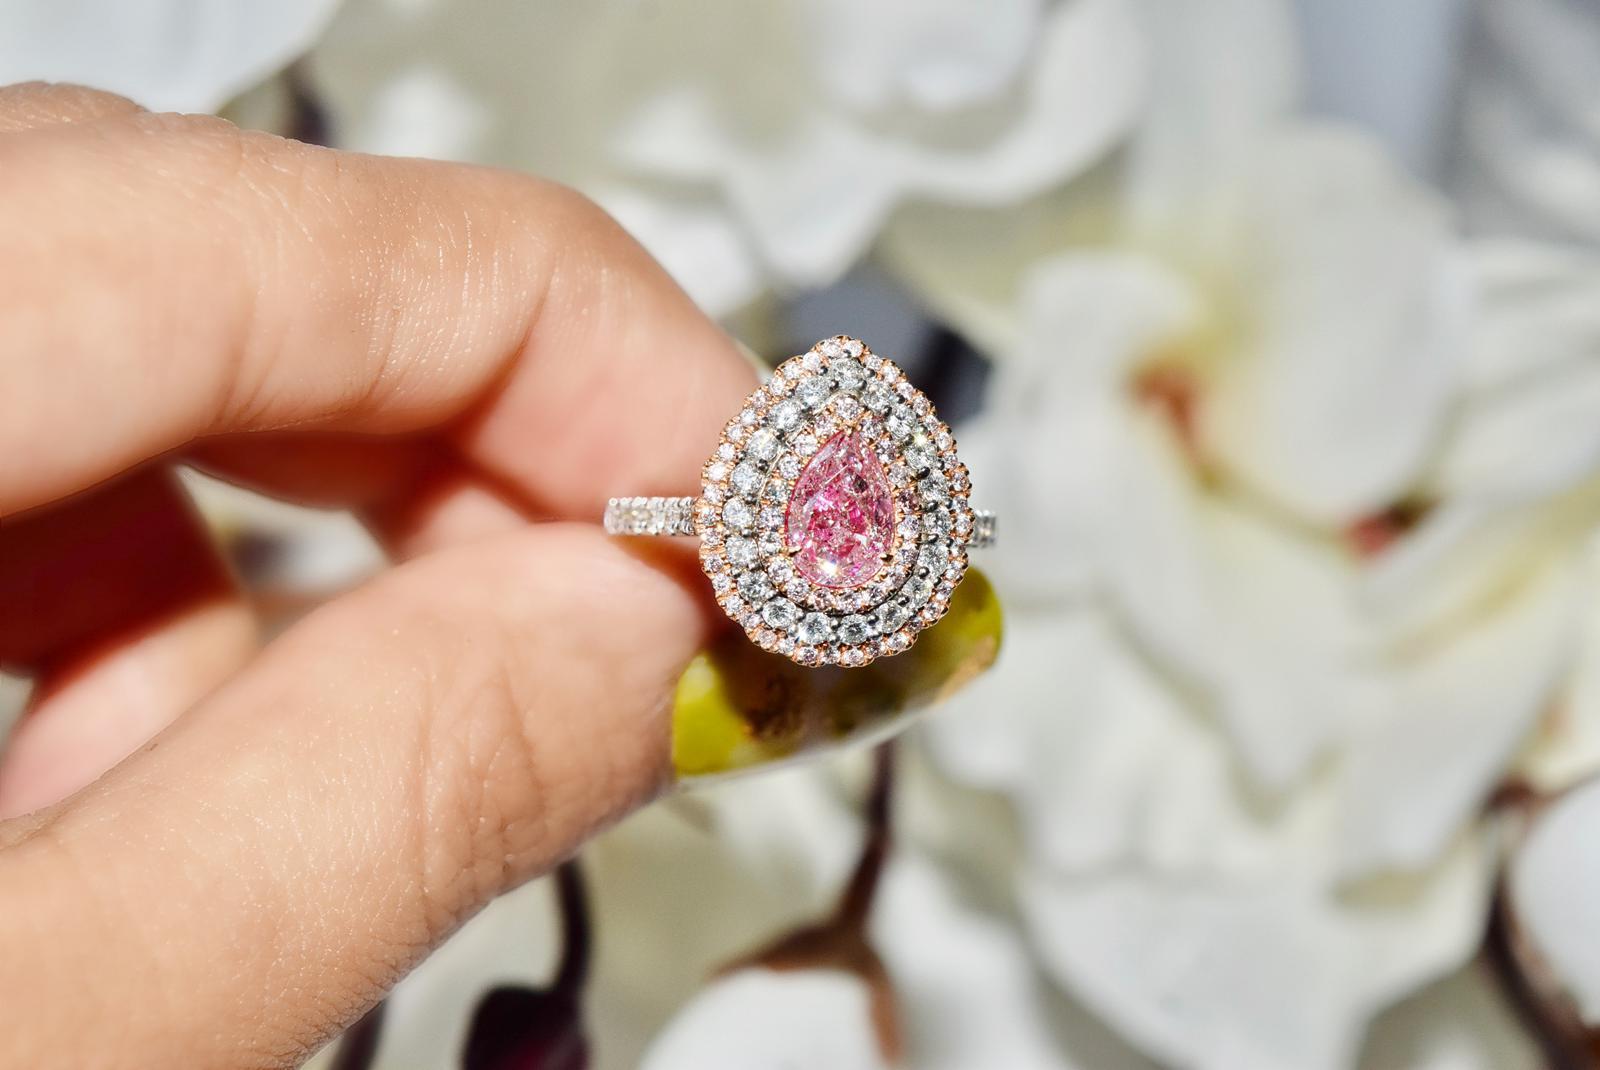 **100% NATURAL FANCY COLOUR DIAMOND JEWELLERIES**

✪ Jewelry Details ✪

♦ MAIN STONE DETAILS

➛ Stone Shape: Pear
➛ Stone Color: Light Pinkish Brown
➛ Stone Weight: 1.00 carats
➛ Clarity: I1
➛ GIA certified

♦ SIDE STONE DETAILS

➛ Side white